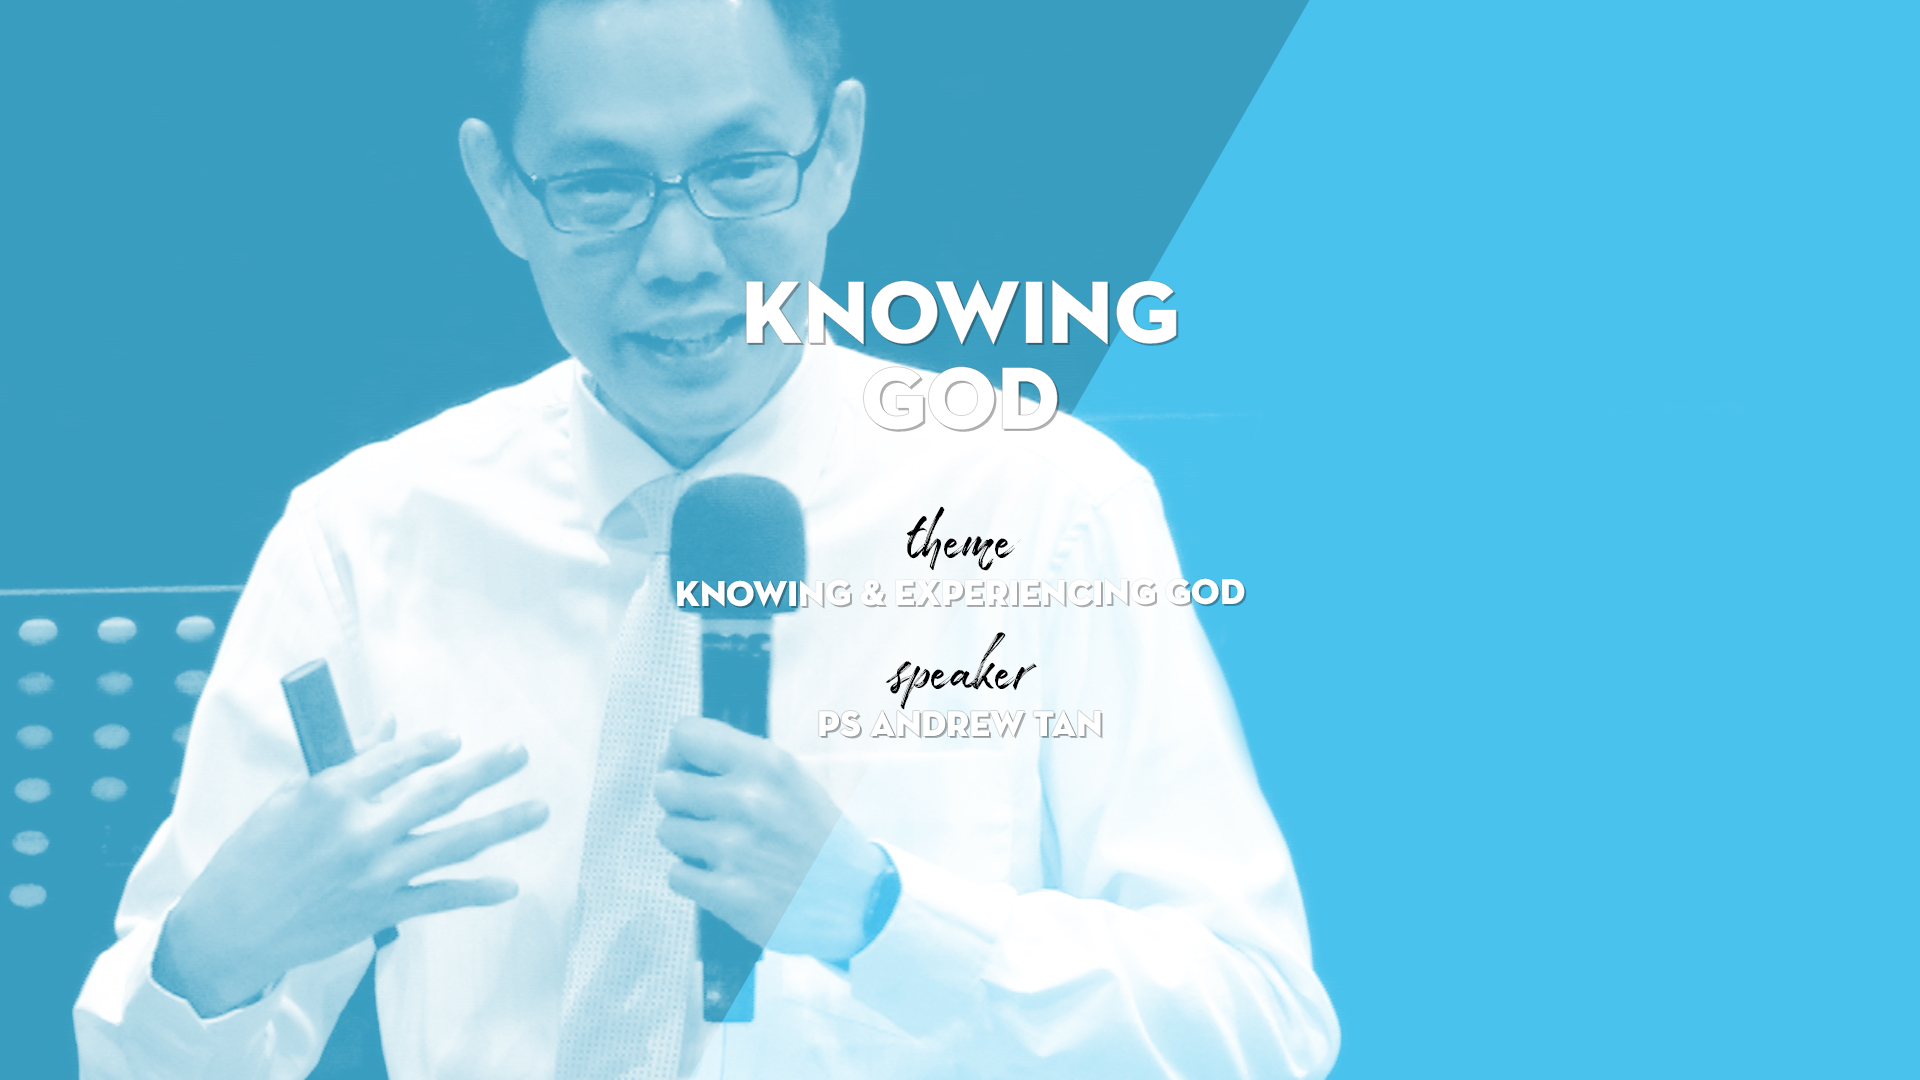 Knowing God (2 Peter 1:1-4)